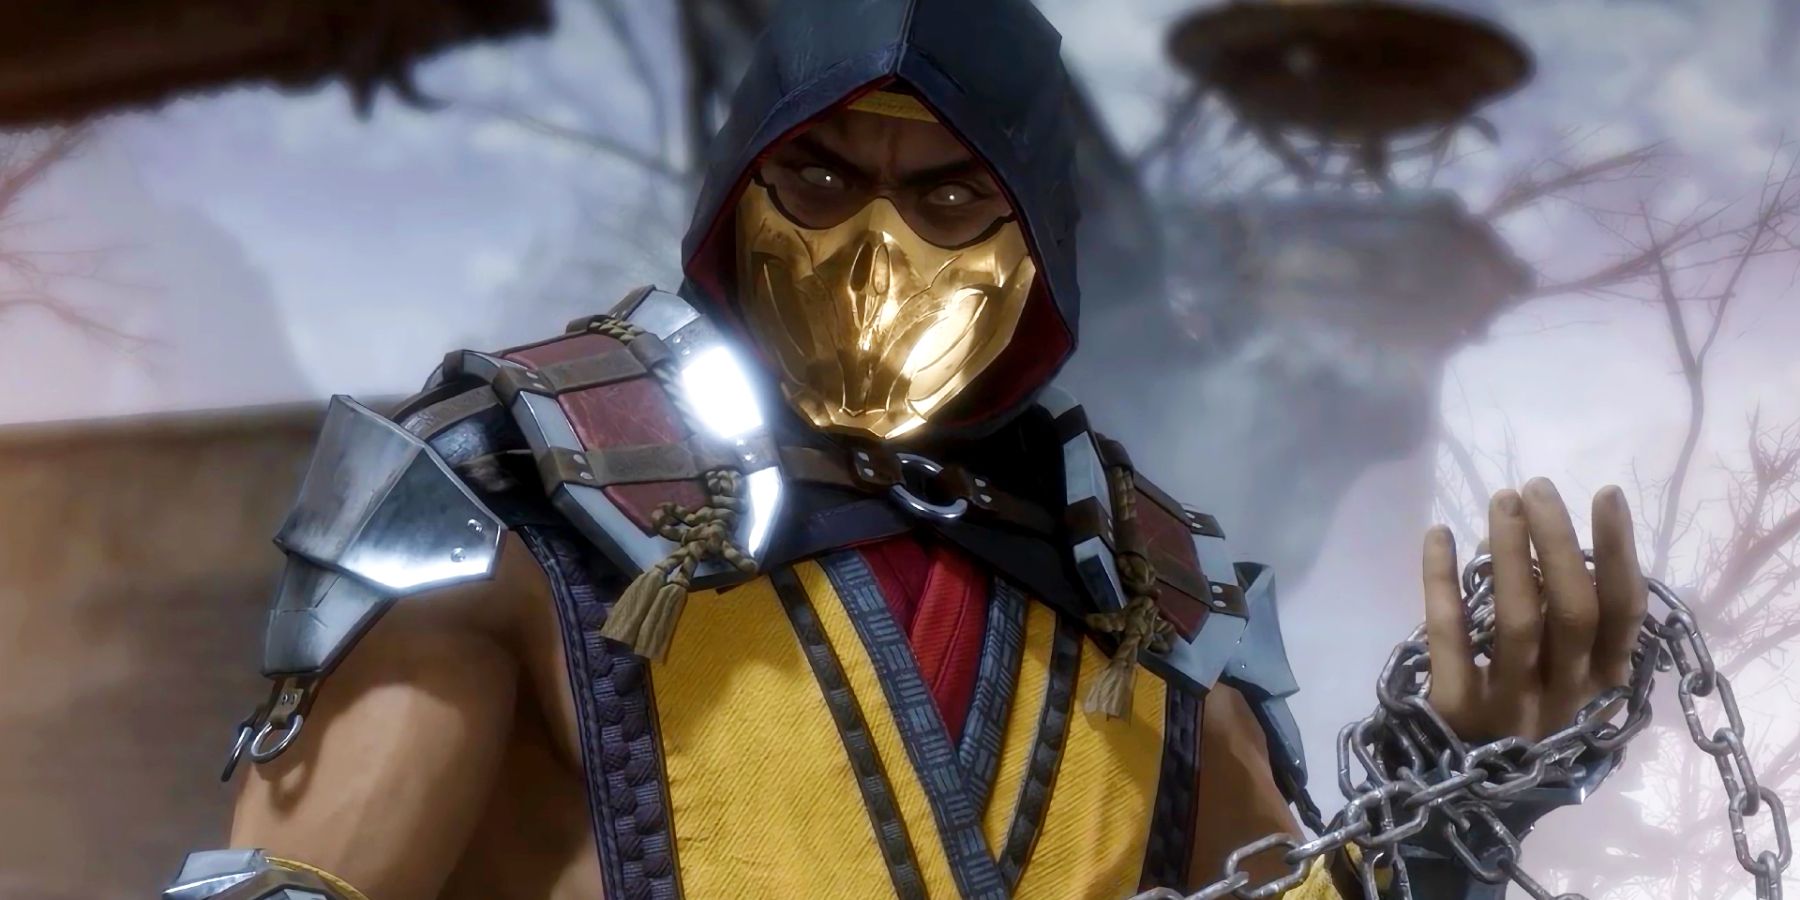 Scorpion from Mortal Kombat 11 with a chain wrapped around his hand.